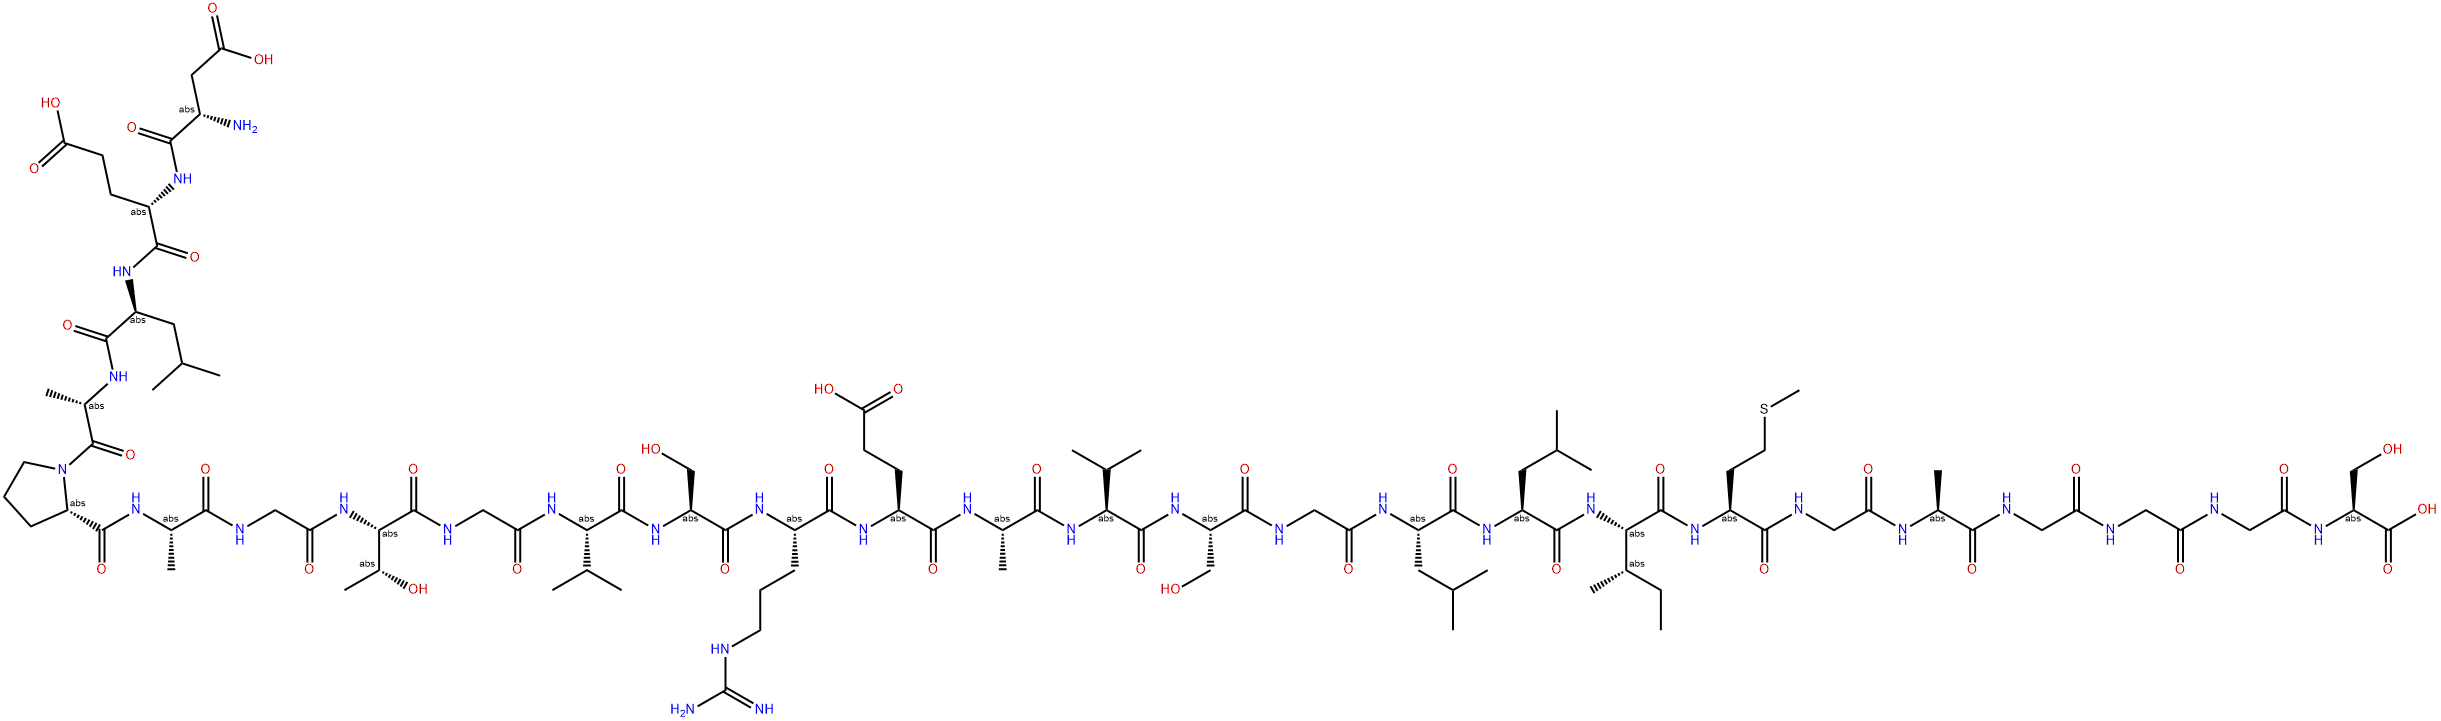 APLP1-derived Ab-like peptide (1-27) Structure